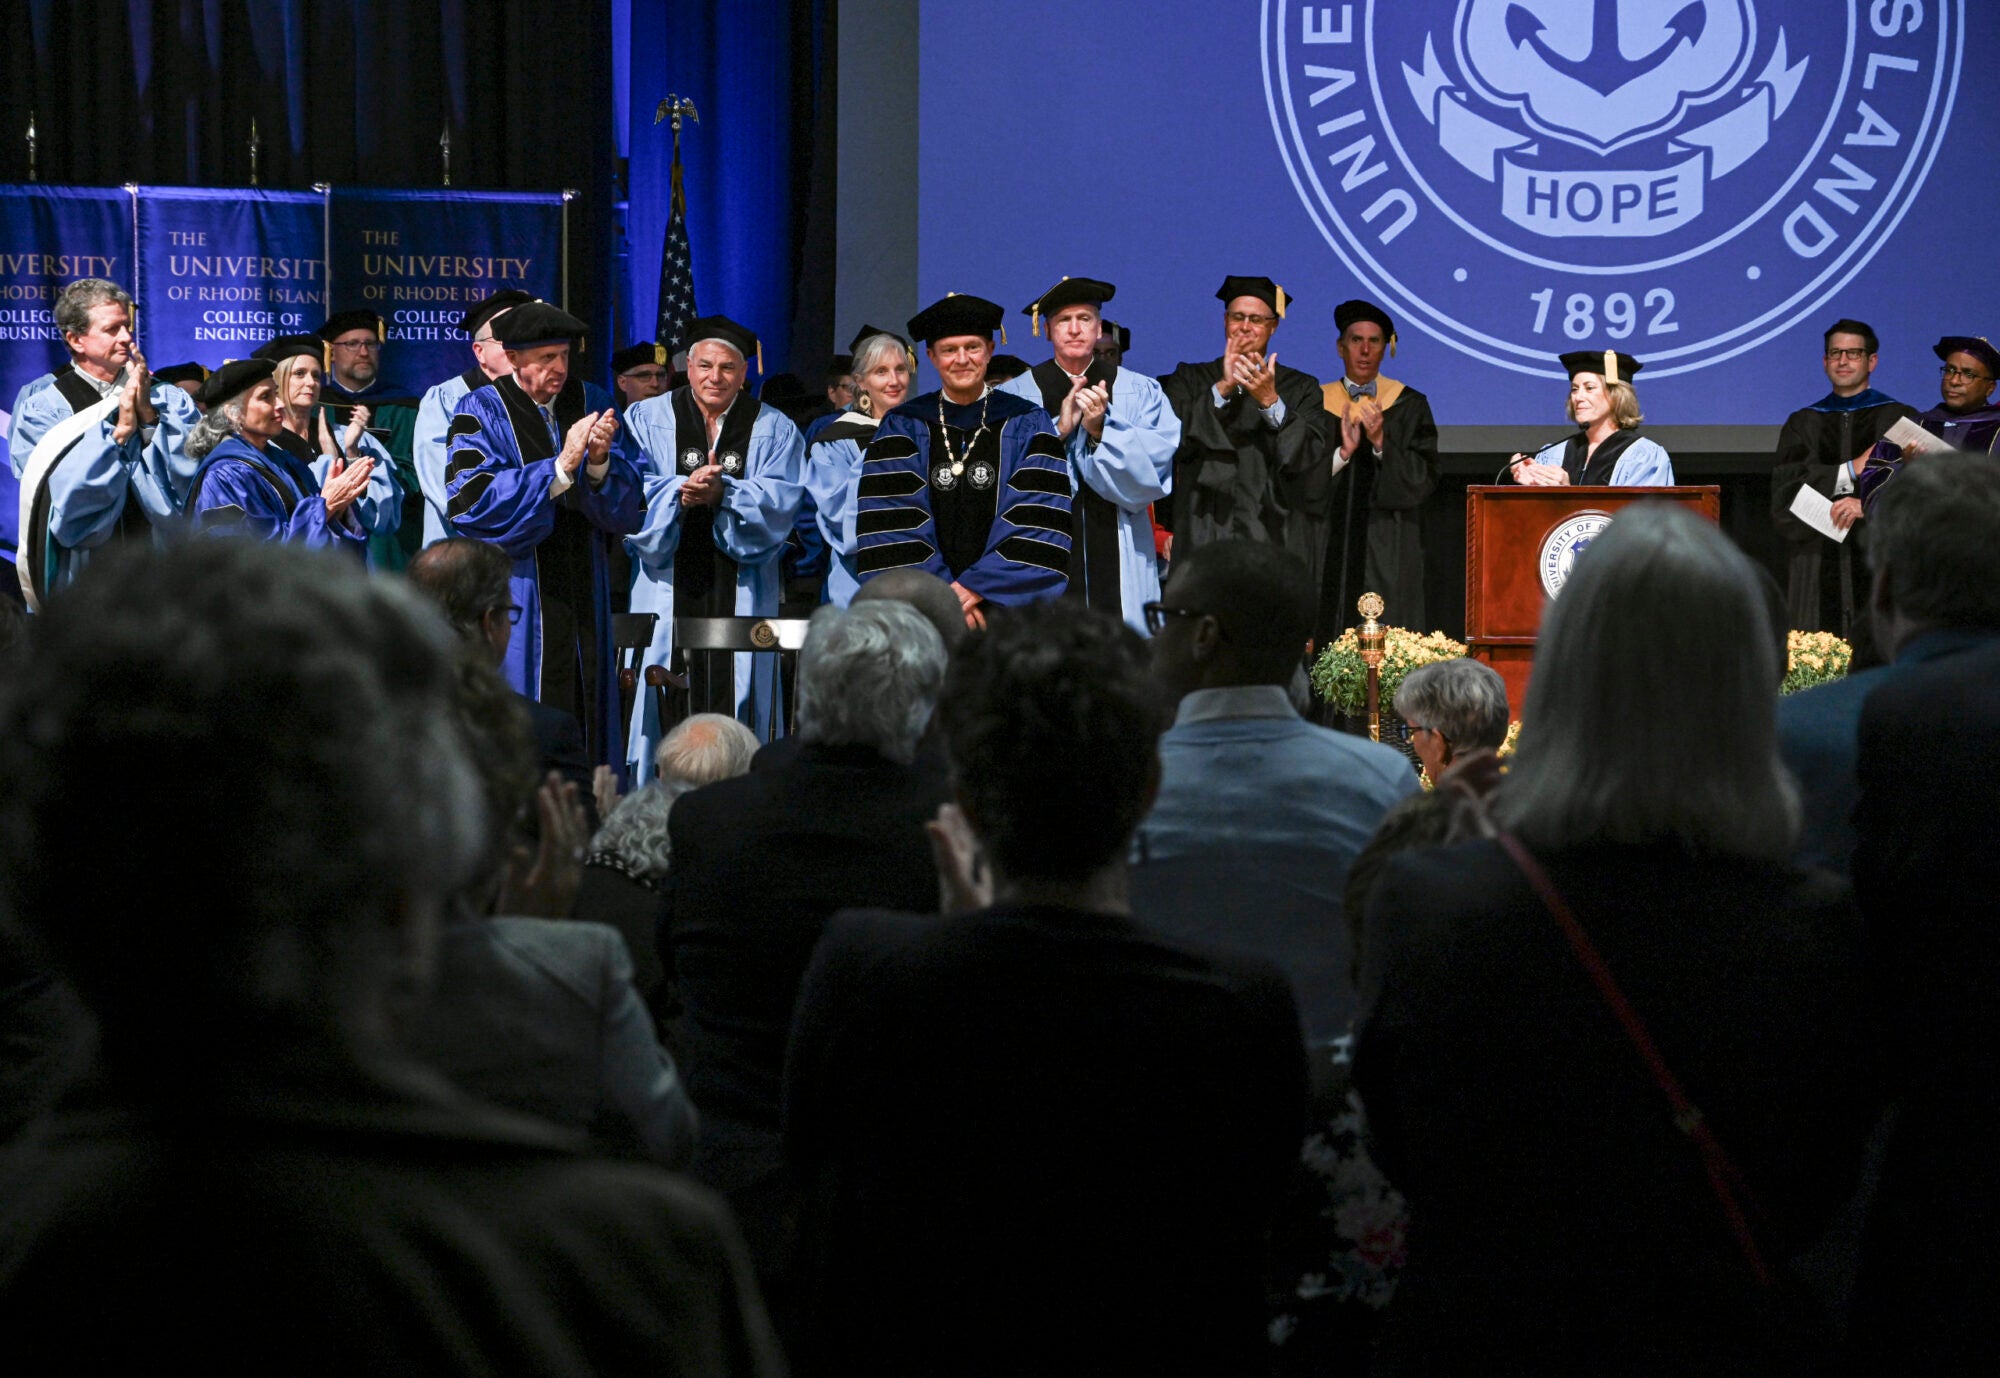 President Parlange on stage at his inauguration, surrounded by university leadership